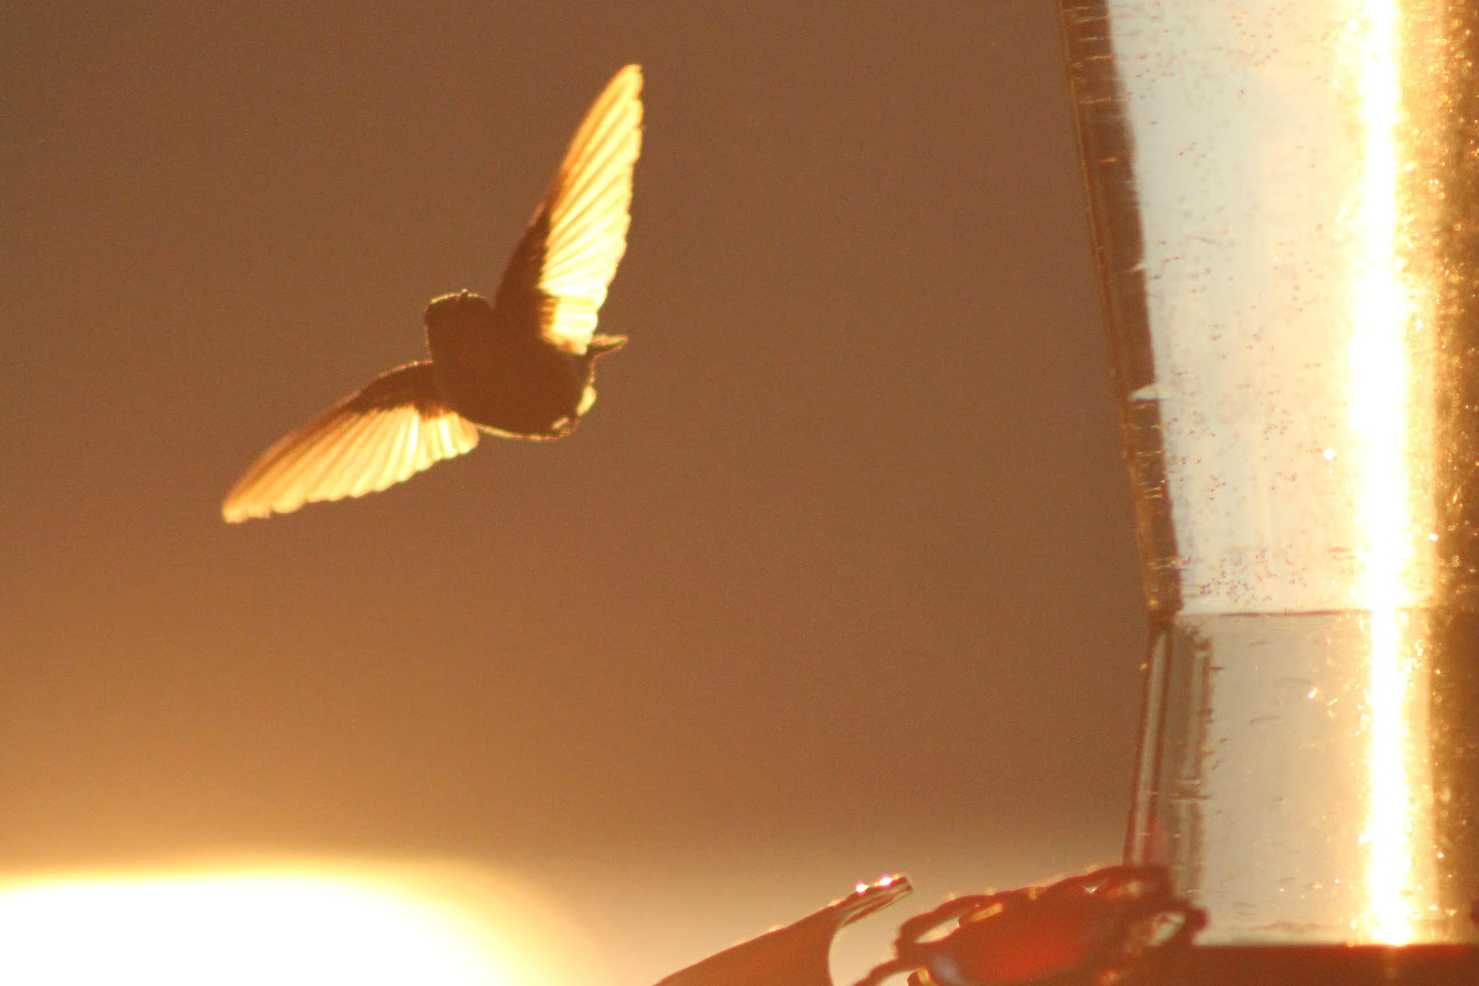 Hummingbird at Sunset Taken at sunset during July 15 on Crescent Lake in Maine.  I had to wait for 3 hours for a good shot like this.  To capture the wings of the hummingbird, I  set the shutter speed to 8000 on my  Canon 7D.